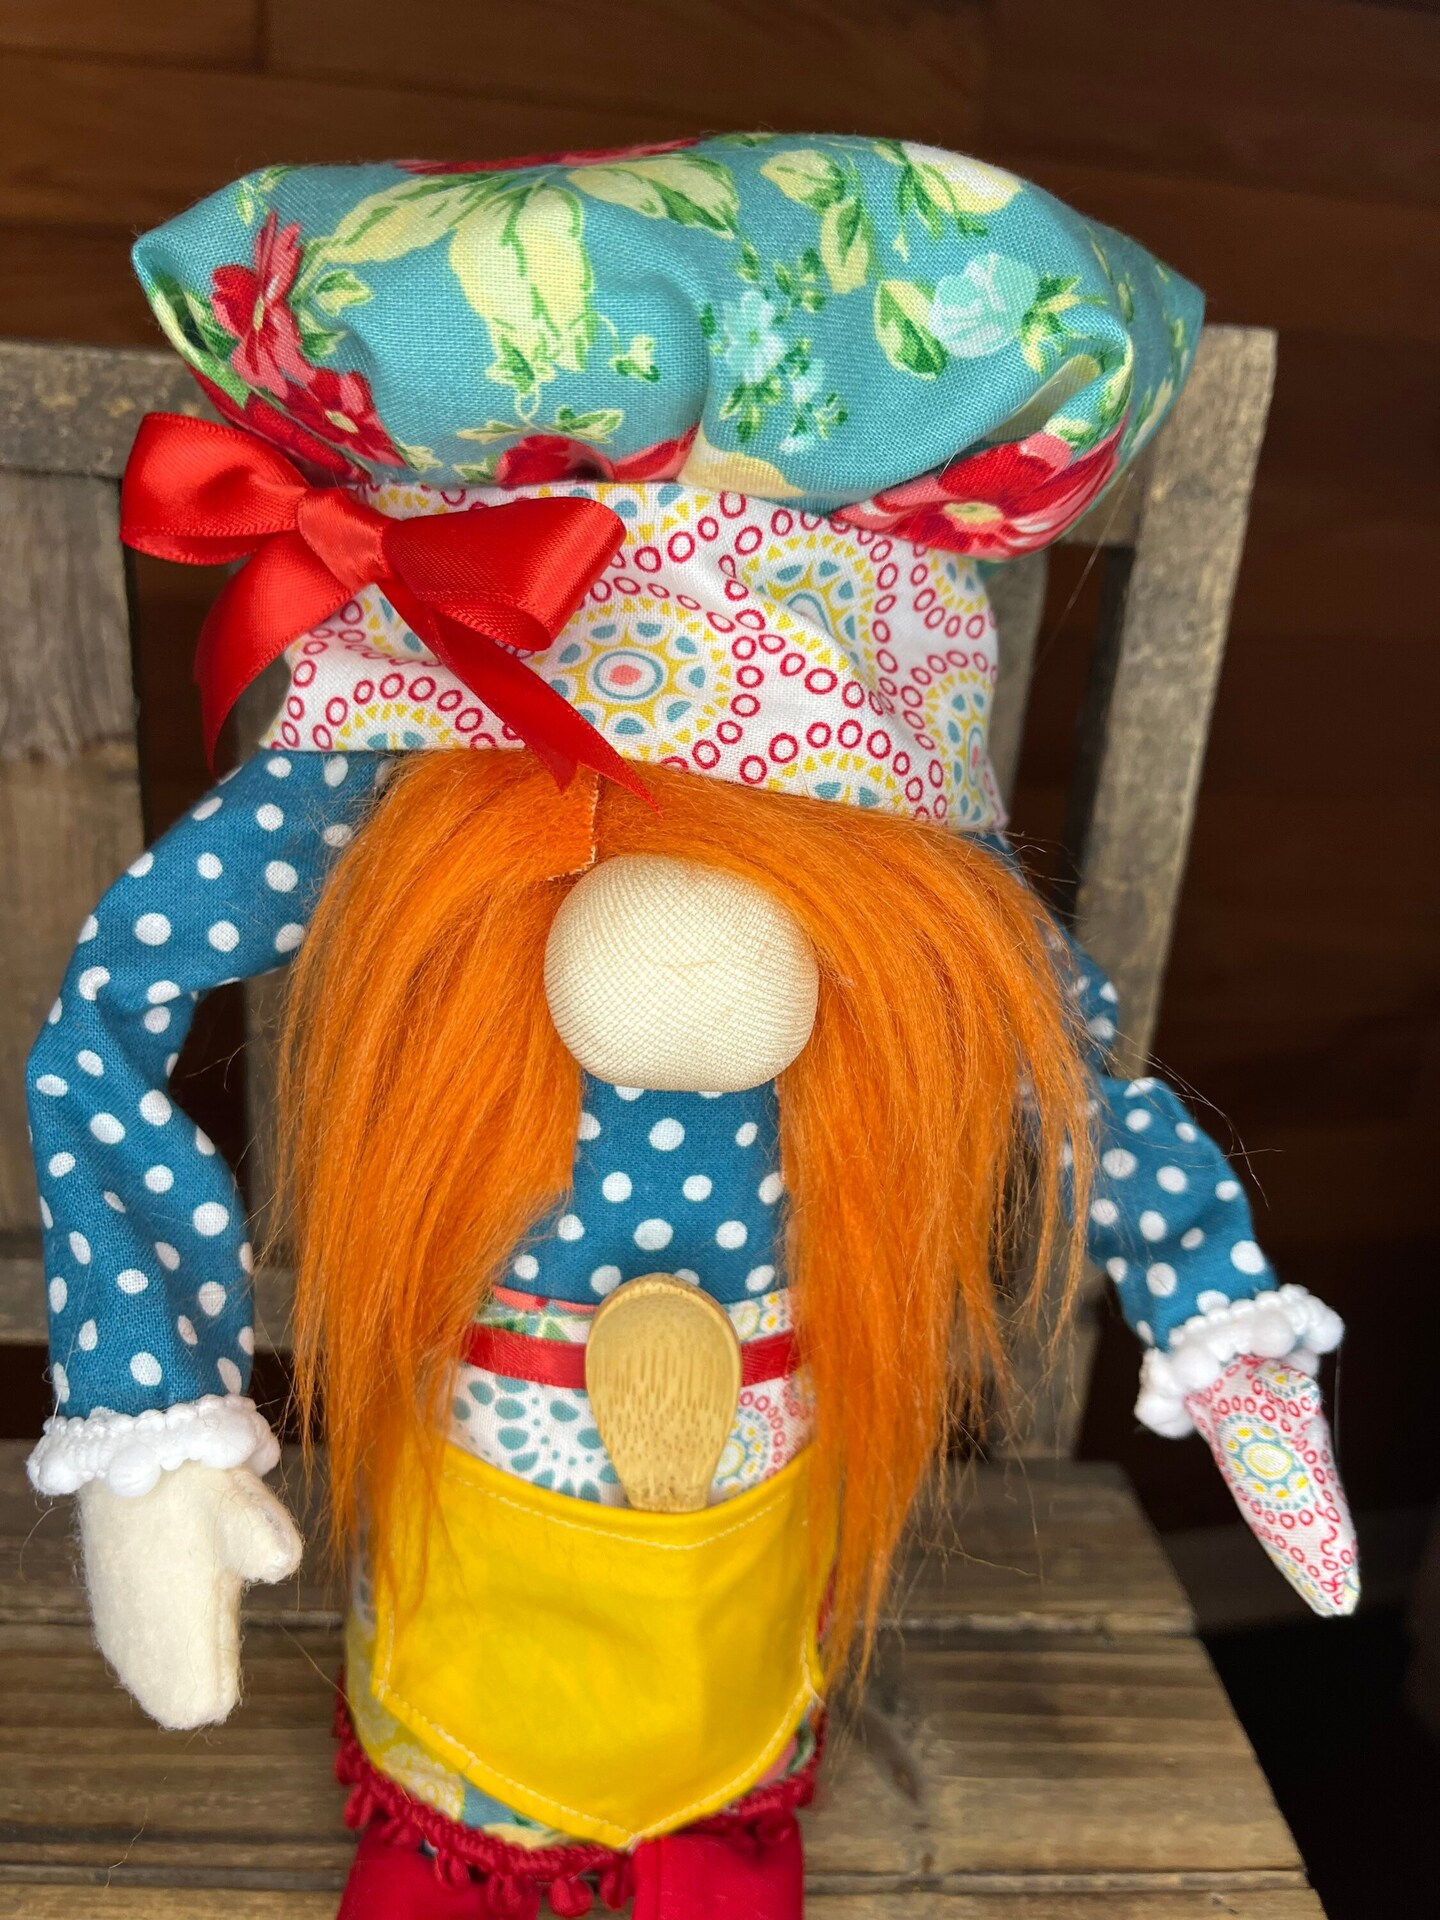 Kitchen Gnome, Chef Gnome, Pioneer Woman Gnome, Ree Drummond Inspired, Kitchen  decor, Pioneer Woman Decor, Gift for her, Tiered Tray decor